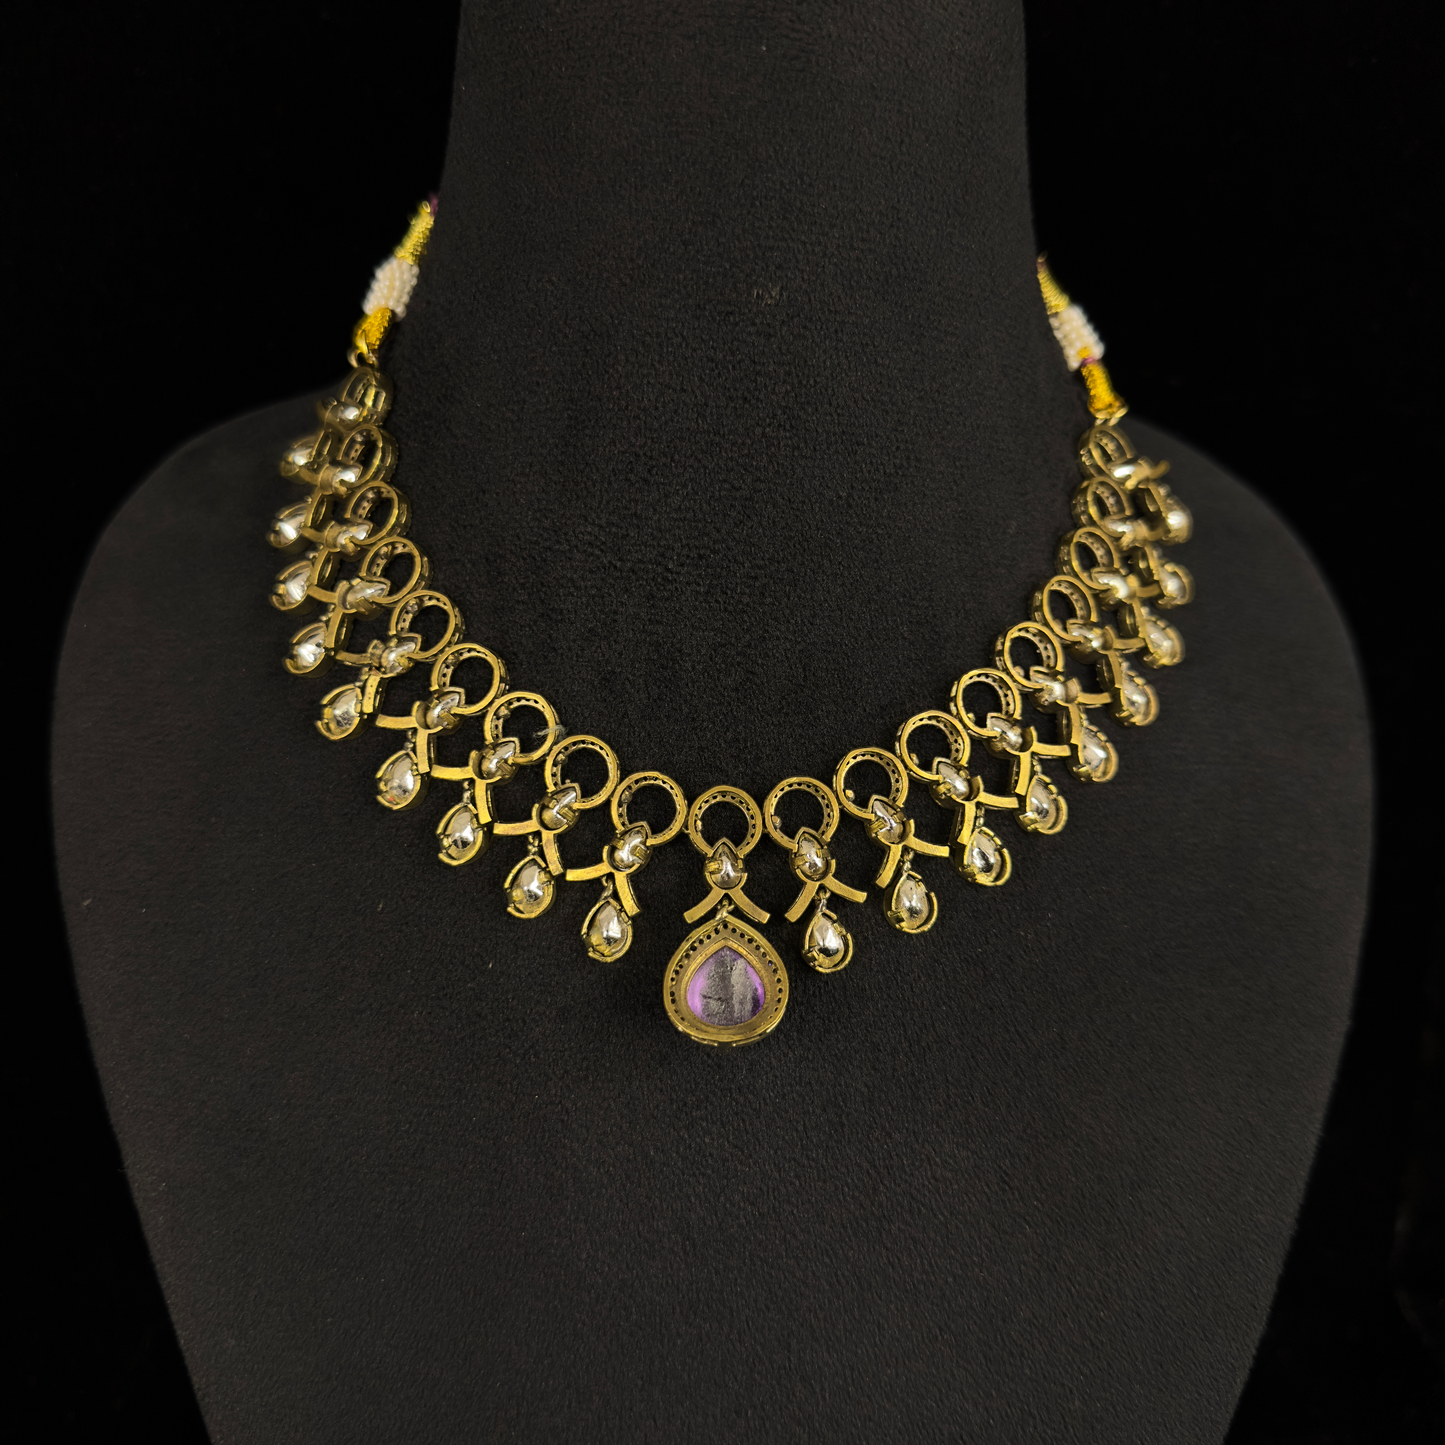 Voguish Victorian Polki Necklace with earrings